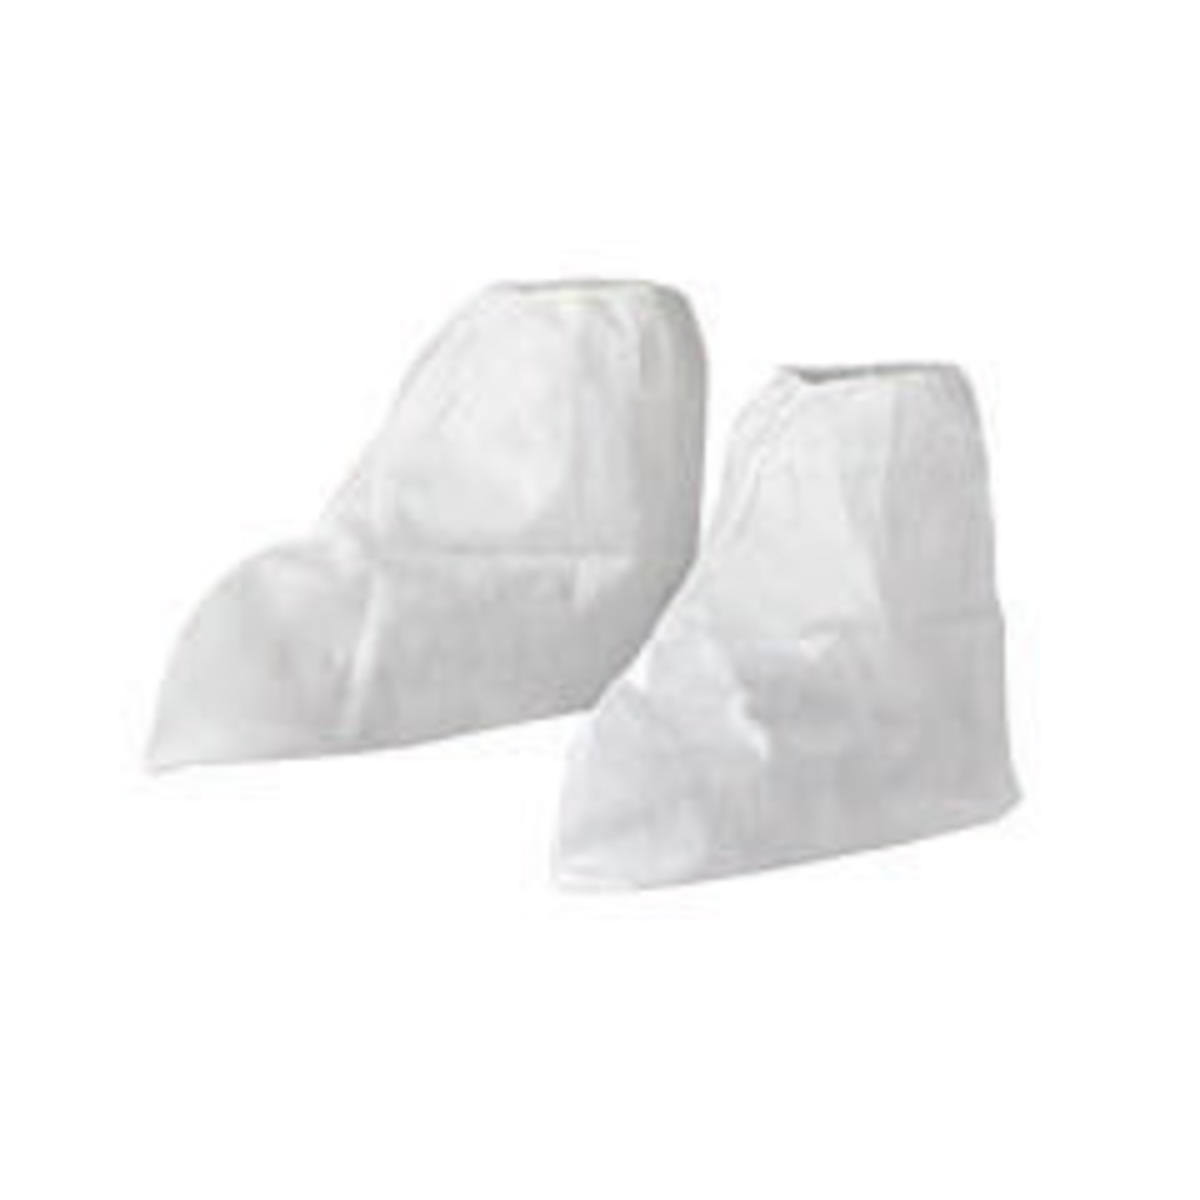 Kimberly-Clark Professional™ White KleenGuard™ A20 SMS Disposable Boot Cover (Availability restrictions apply.)